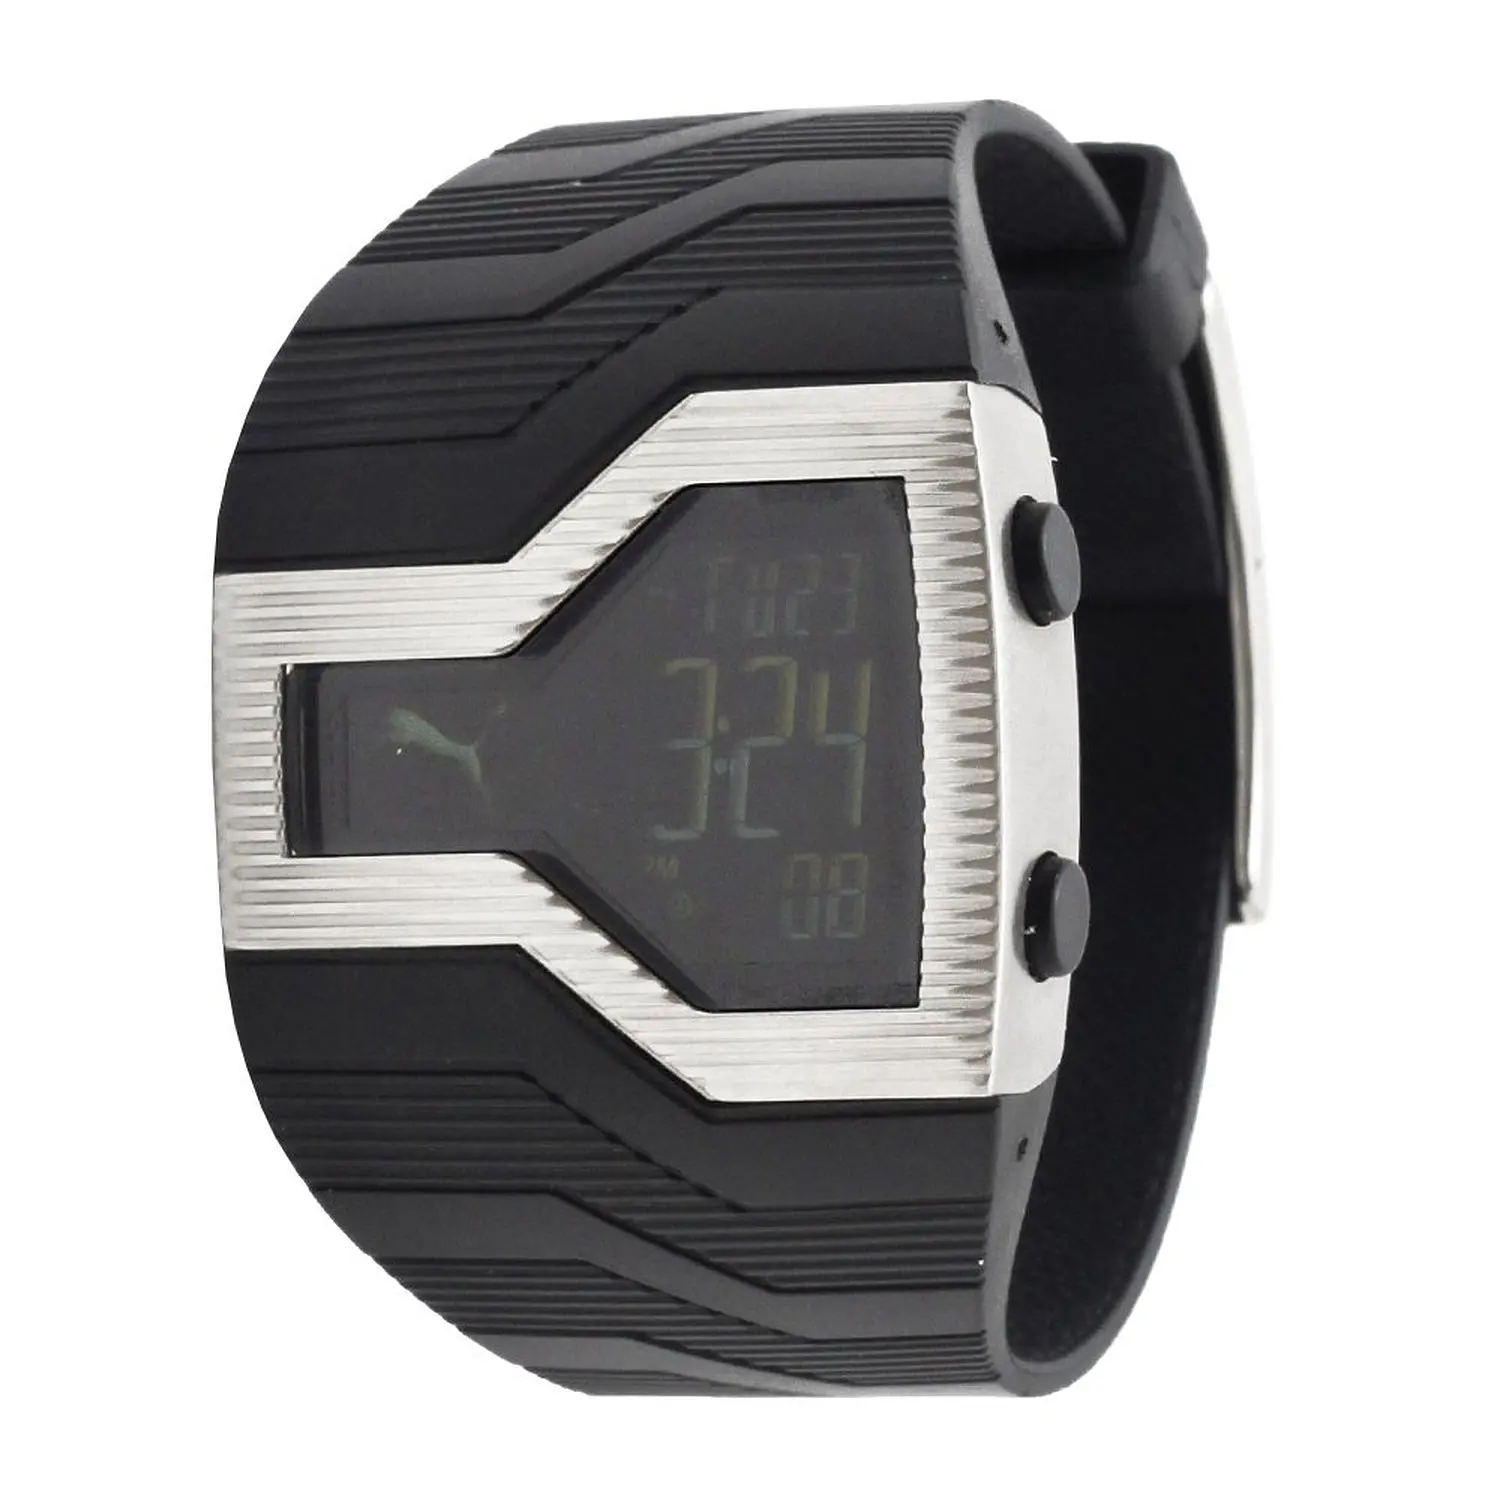 puma stainless steel 805 watch manual